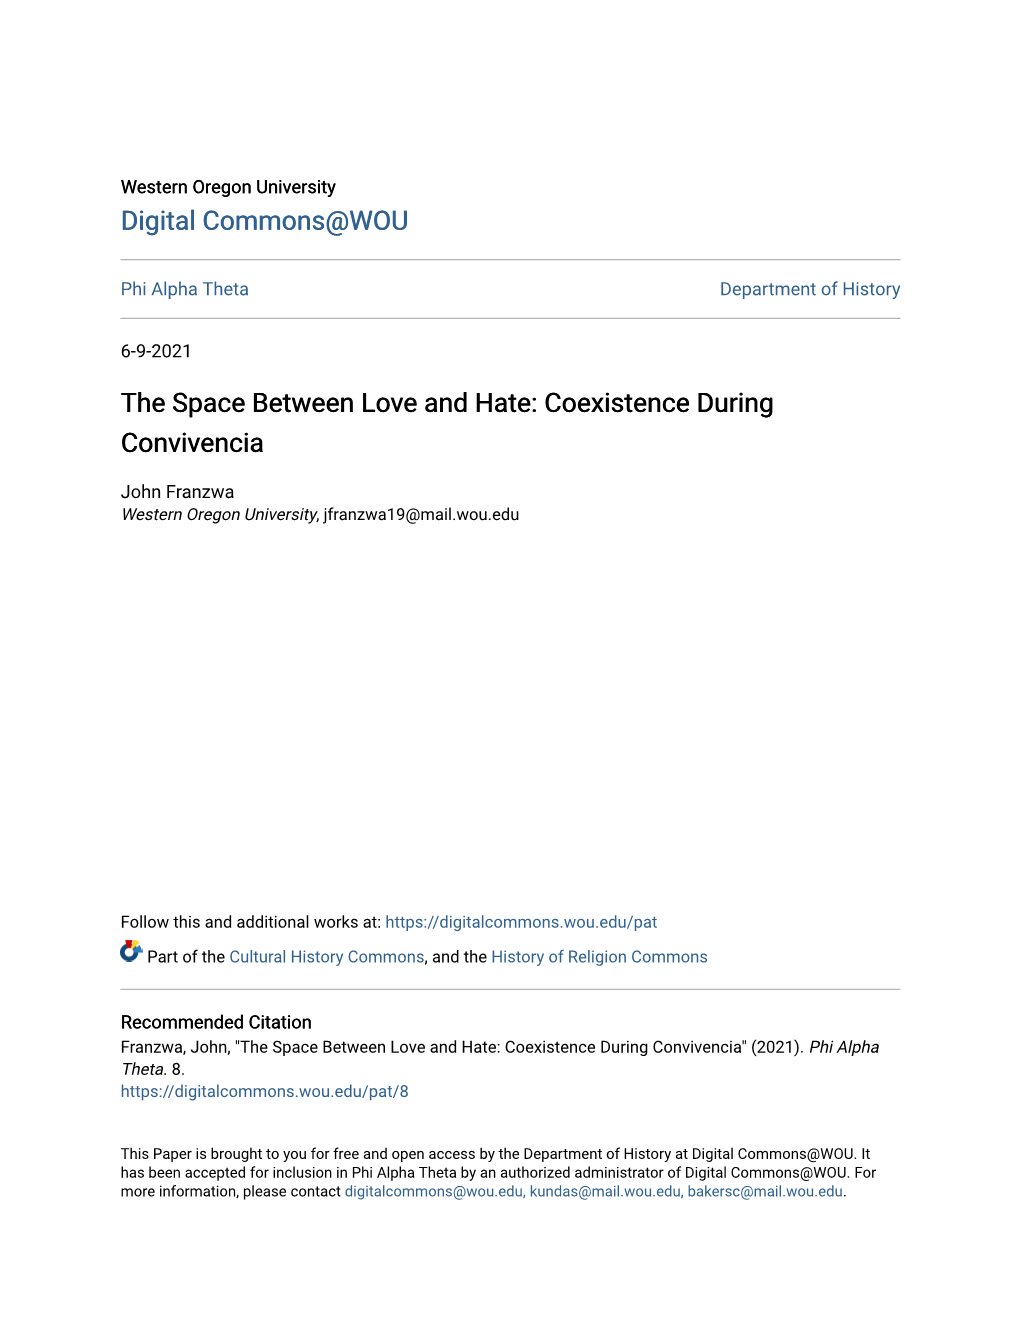 The Space Between Love and Hate: Coexistence During Convivencia